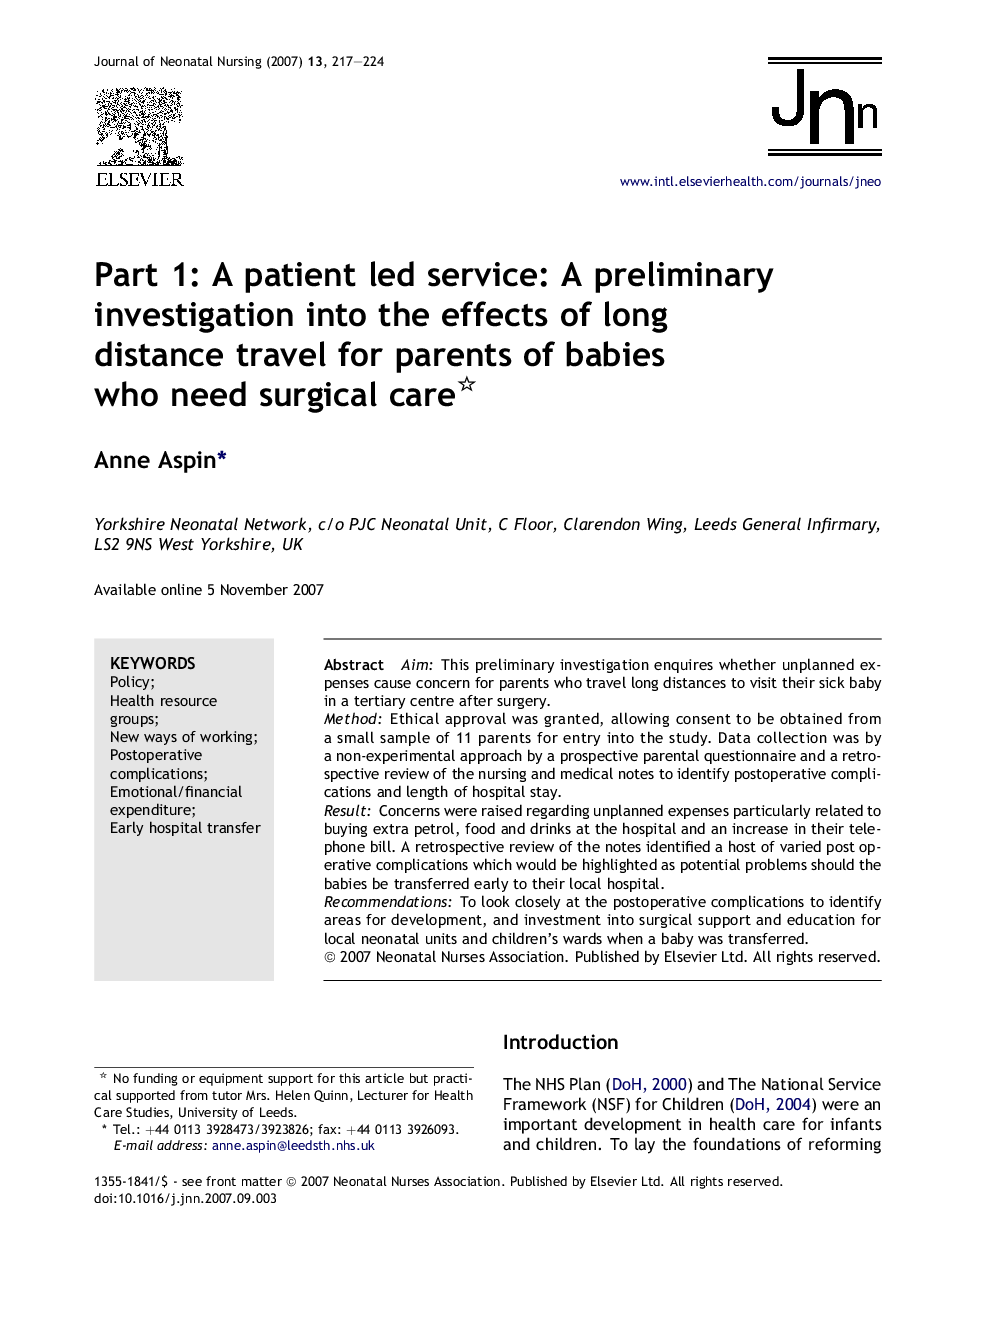 Part 1: A patient led service: A preliminary investigation into the effects of long distance travel for parents of babies who need surgical care